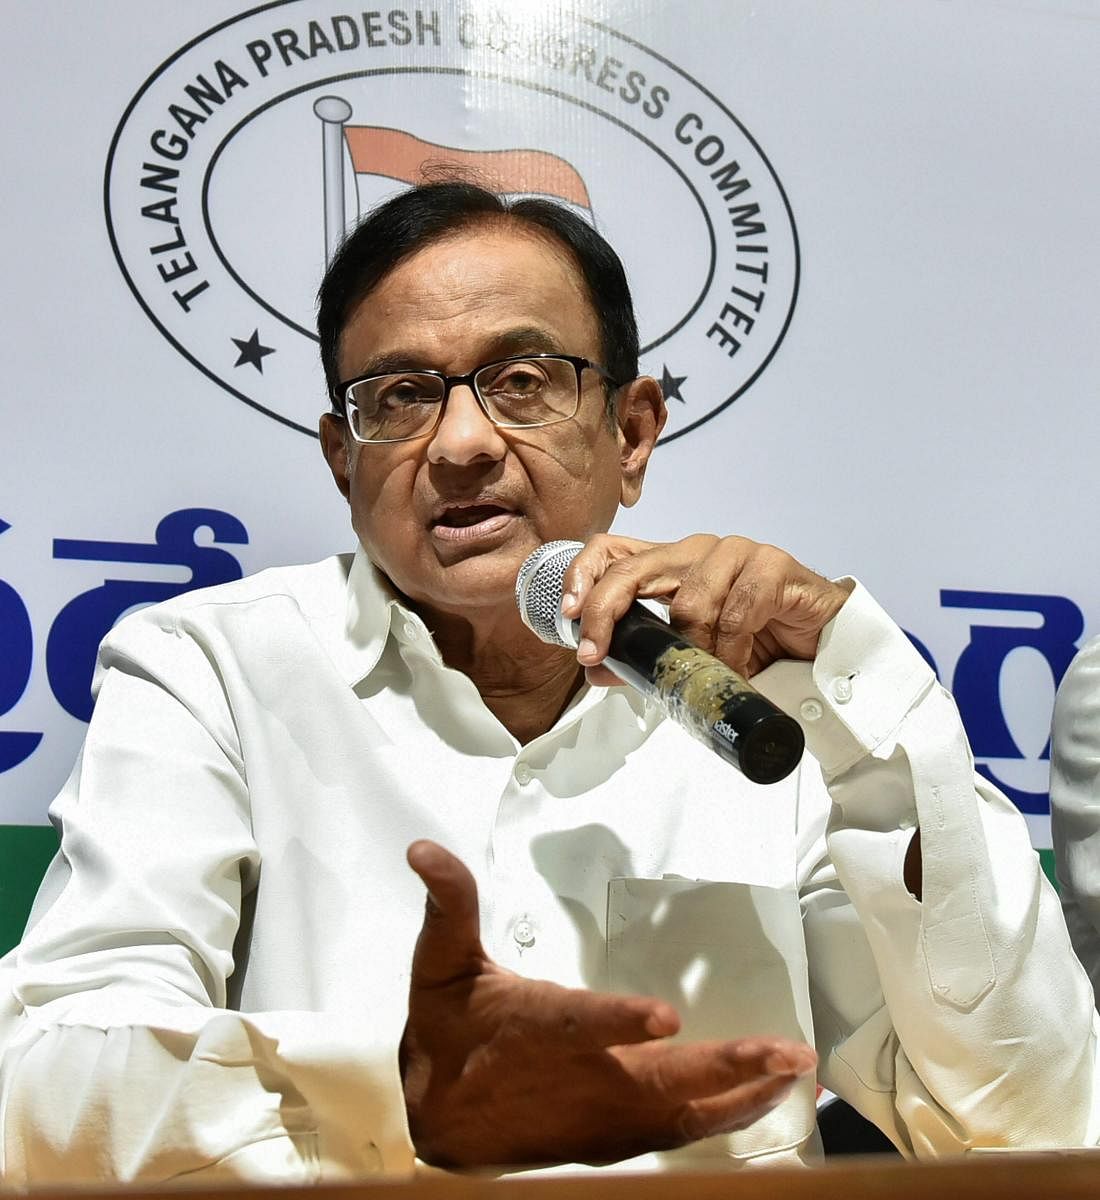 Former Union minister and senior Congress leader P Chidambaram said, "Now that Niti Aayog has done the hatchet job, it is time to wind up the utterly worthless body."